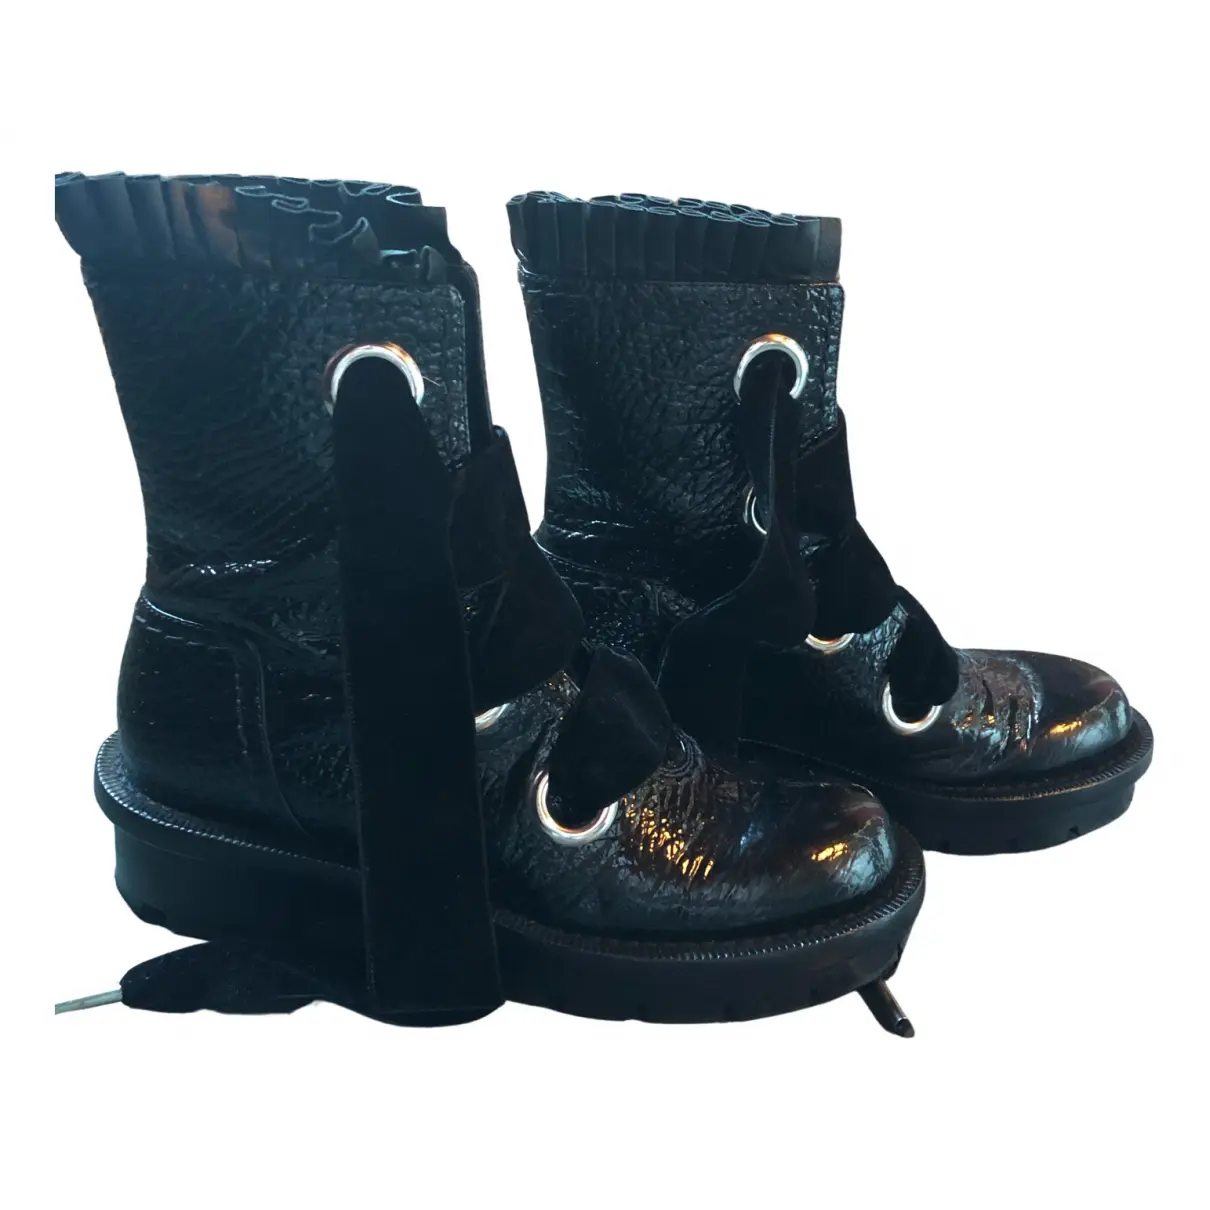 Patent leather lace up boots Alexander McQueen